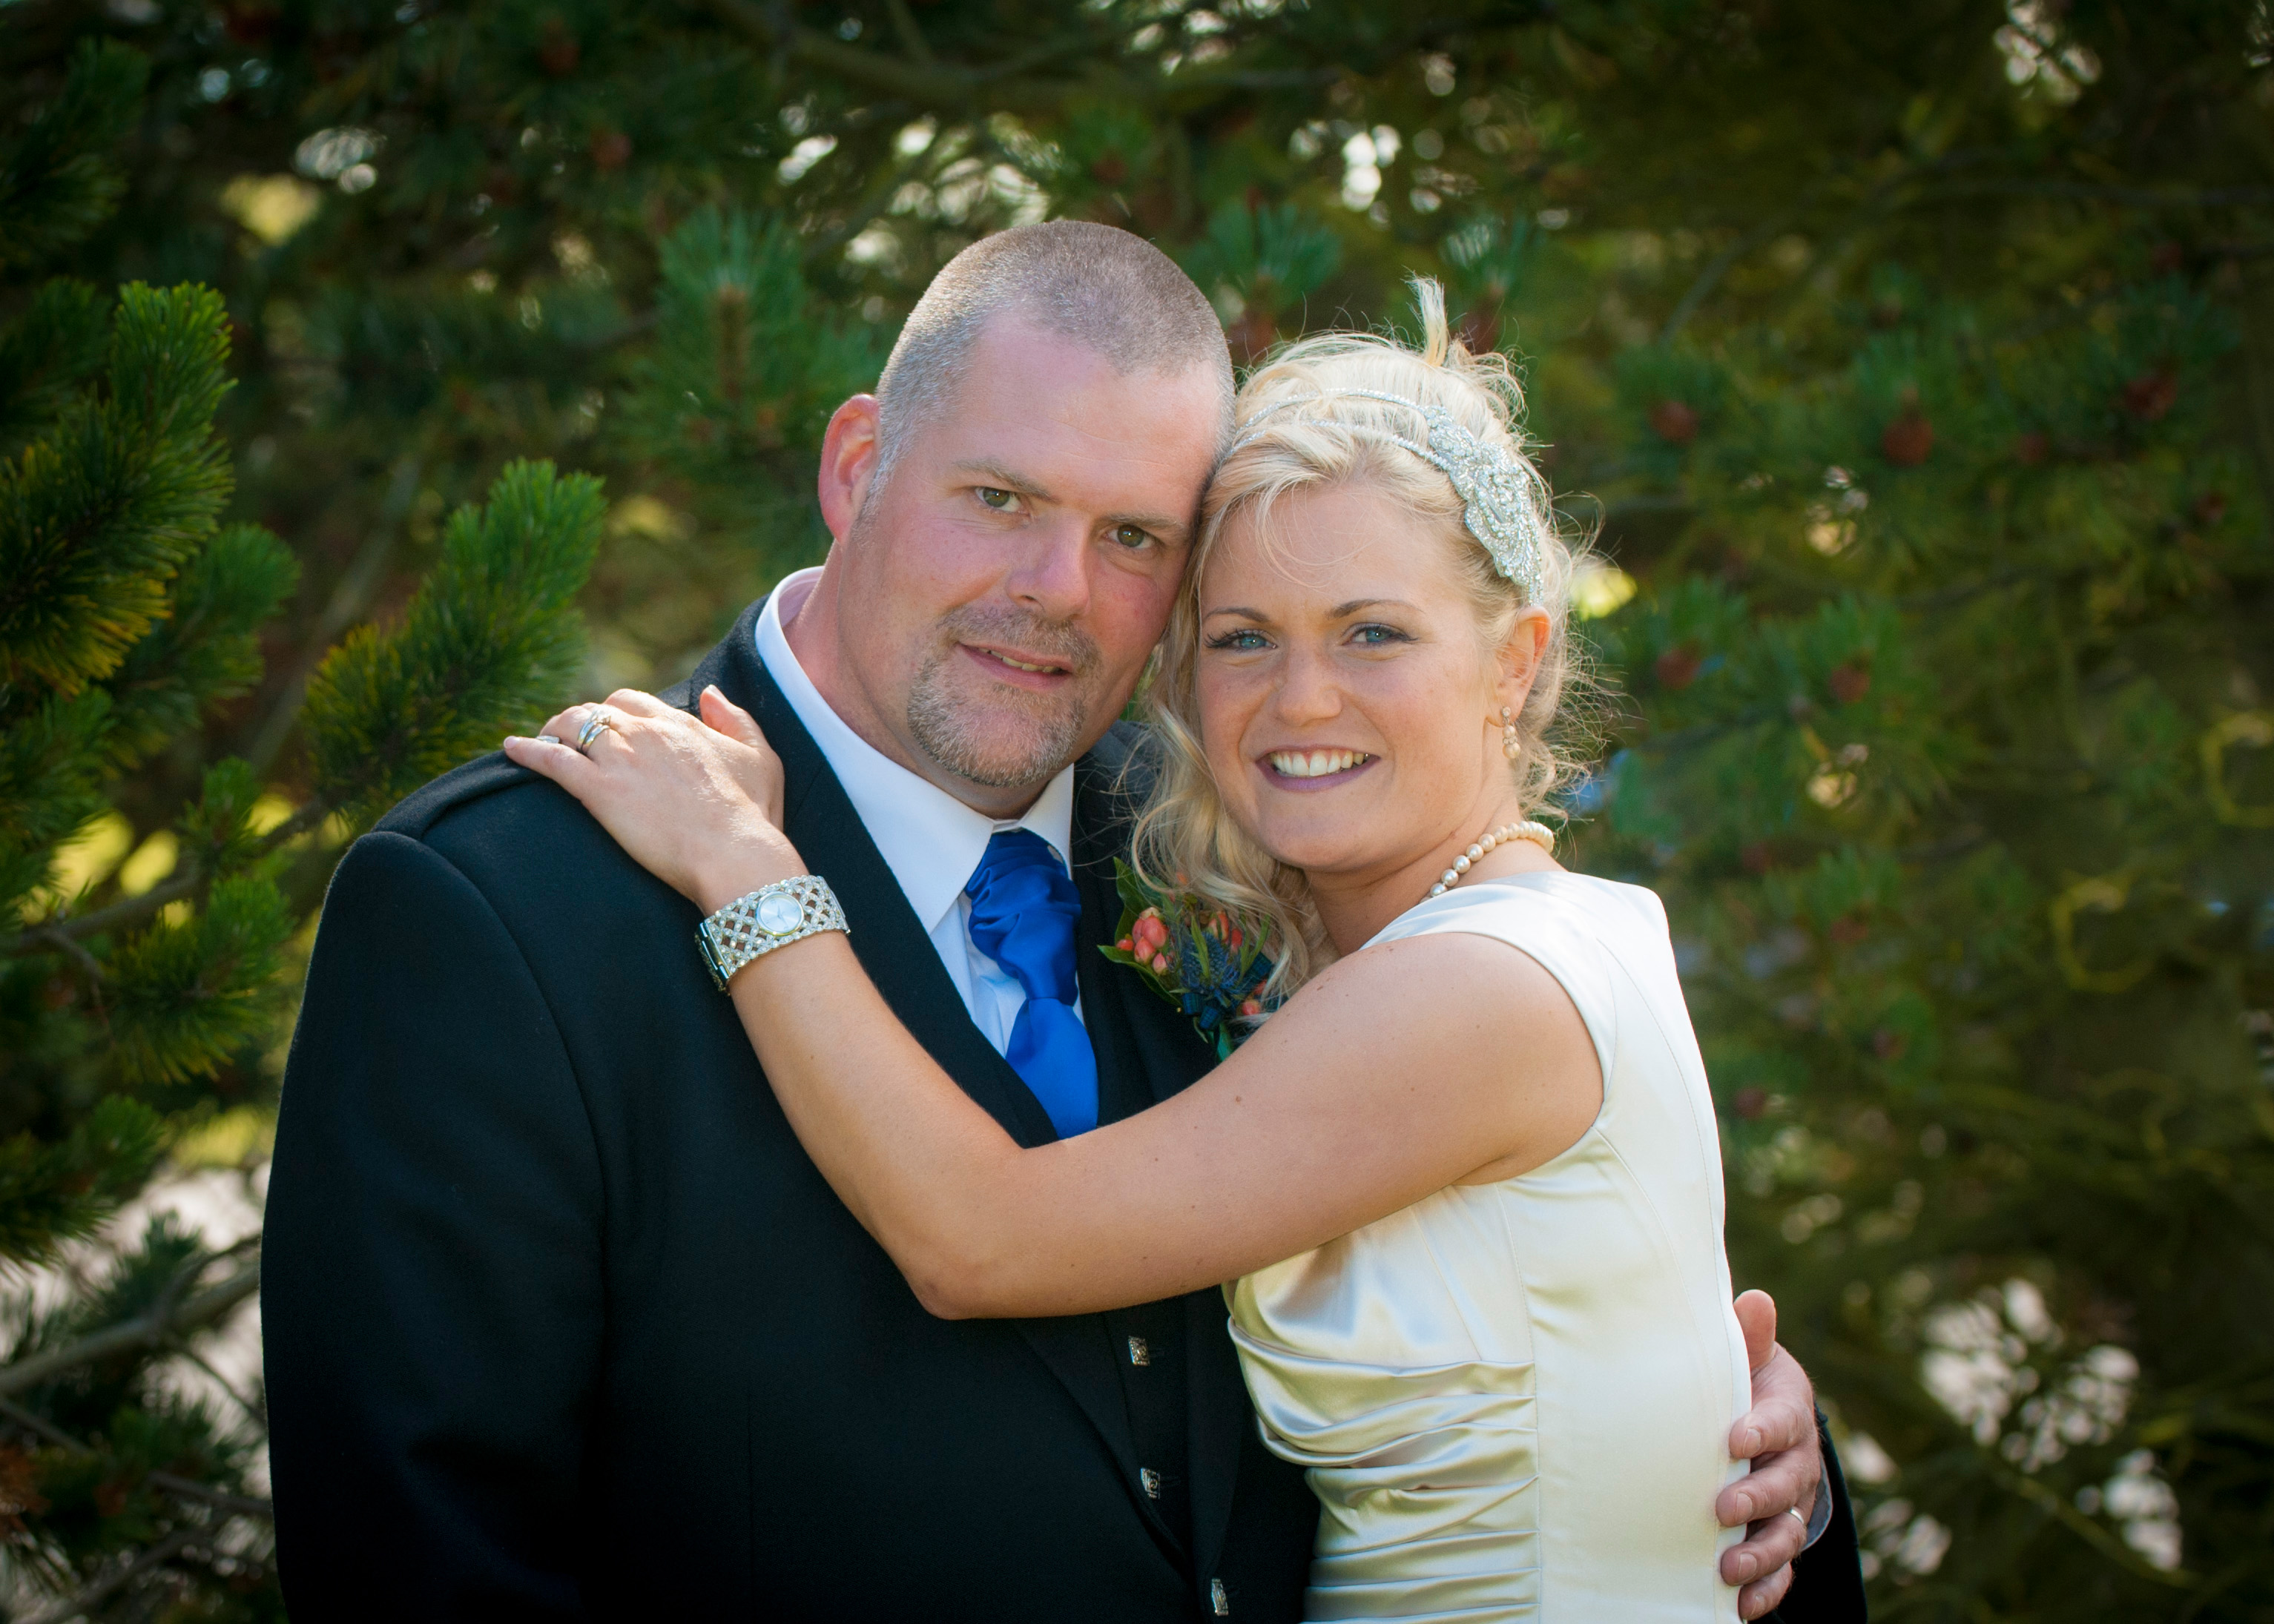 August 3rd – Diane and Lee at the Thistle Altens